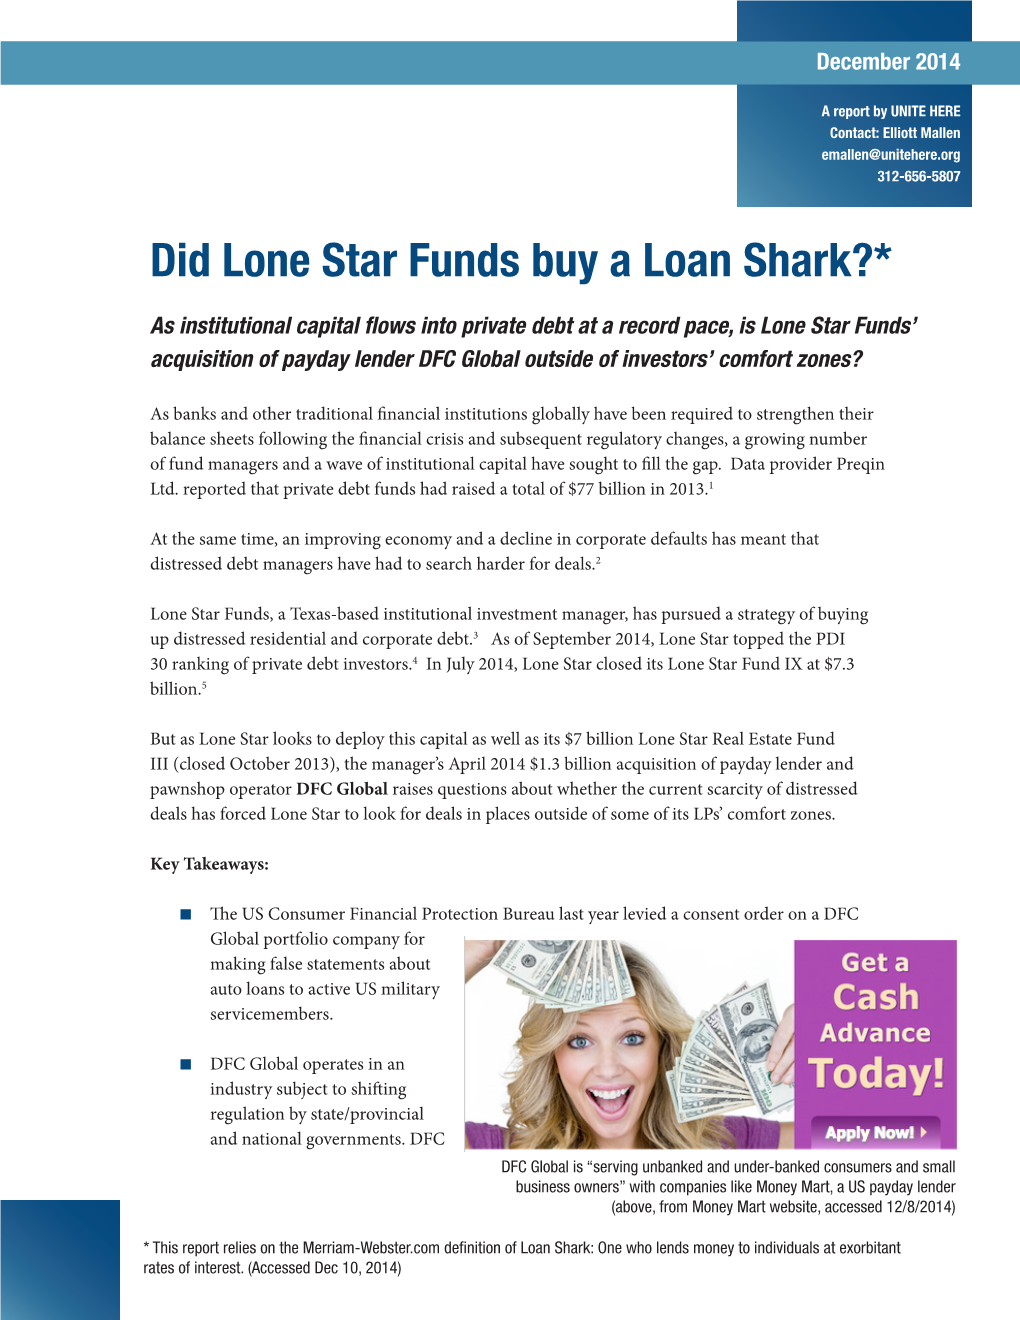 Did Lone Star Funds Buy a Loan Shark?*